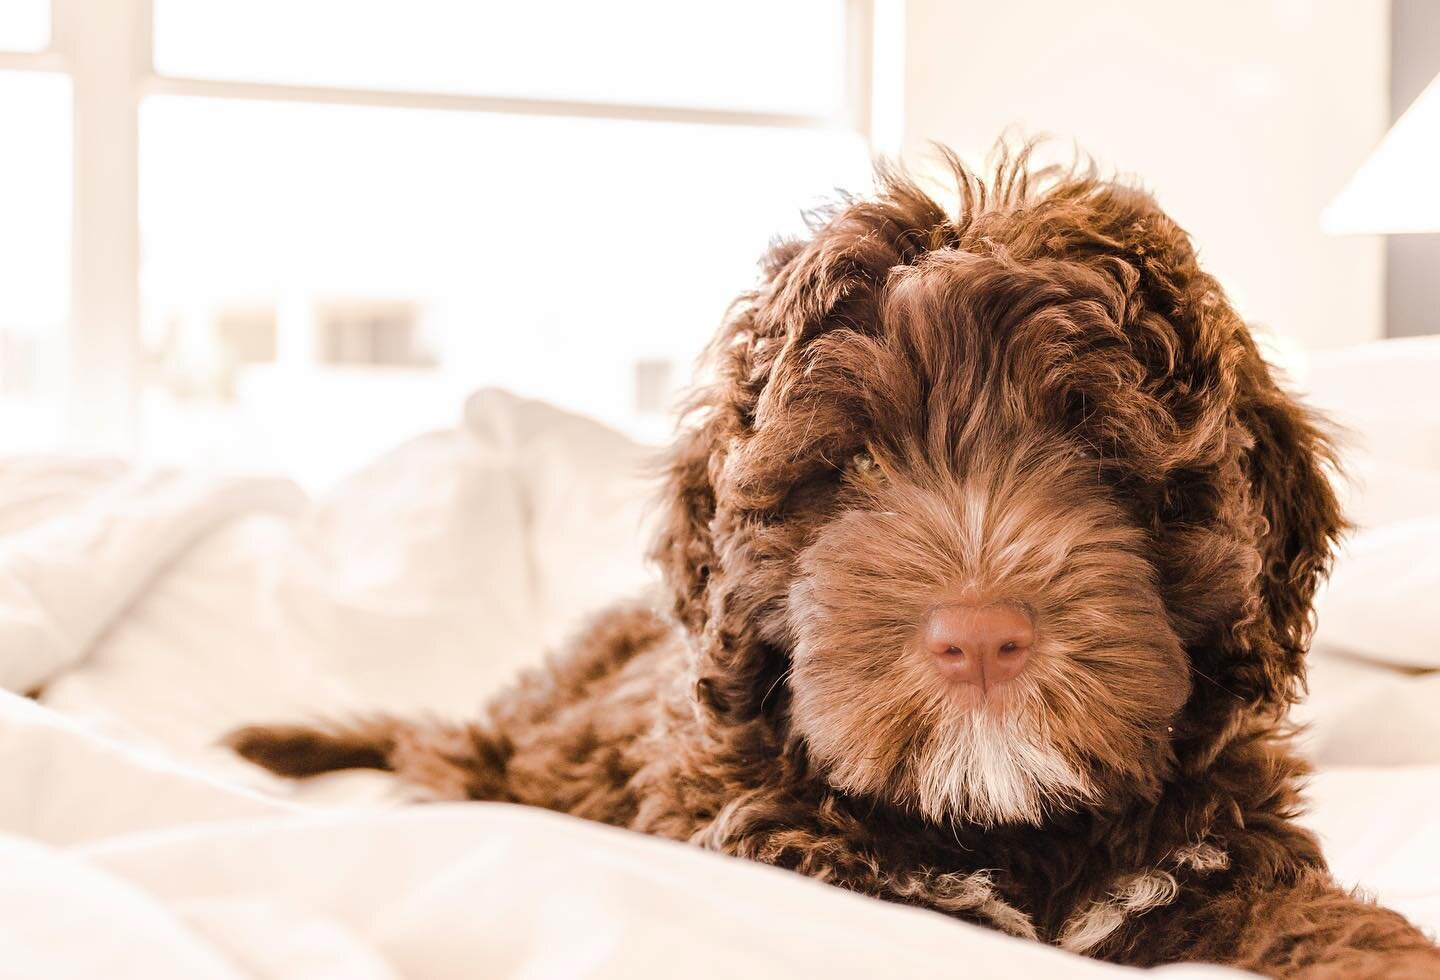 First they steal your heart, then they steal your bed.

✨

.
.
.
.
.
.
.
.
#labordoodle #furrypets #dogsofinstamedia #dogsofinstagramm #beautifuldogsofinstagram #beautifuldoggy #dogmamalife #dogmomproblems #dogmommonday #dogmomday #dogmomprobs #puppy